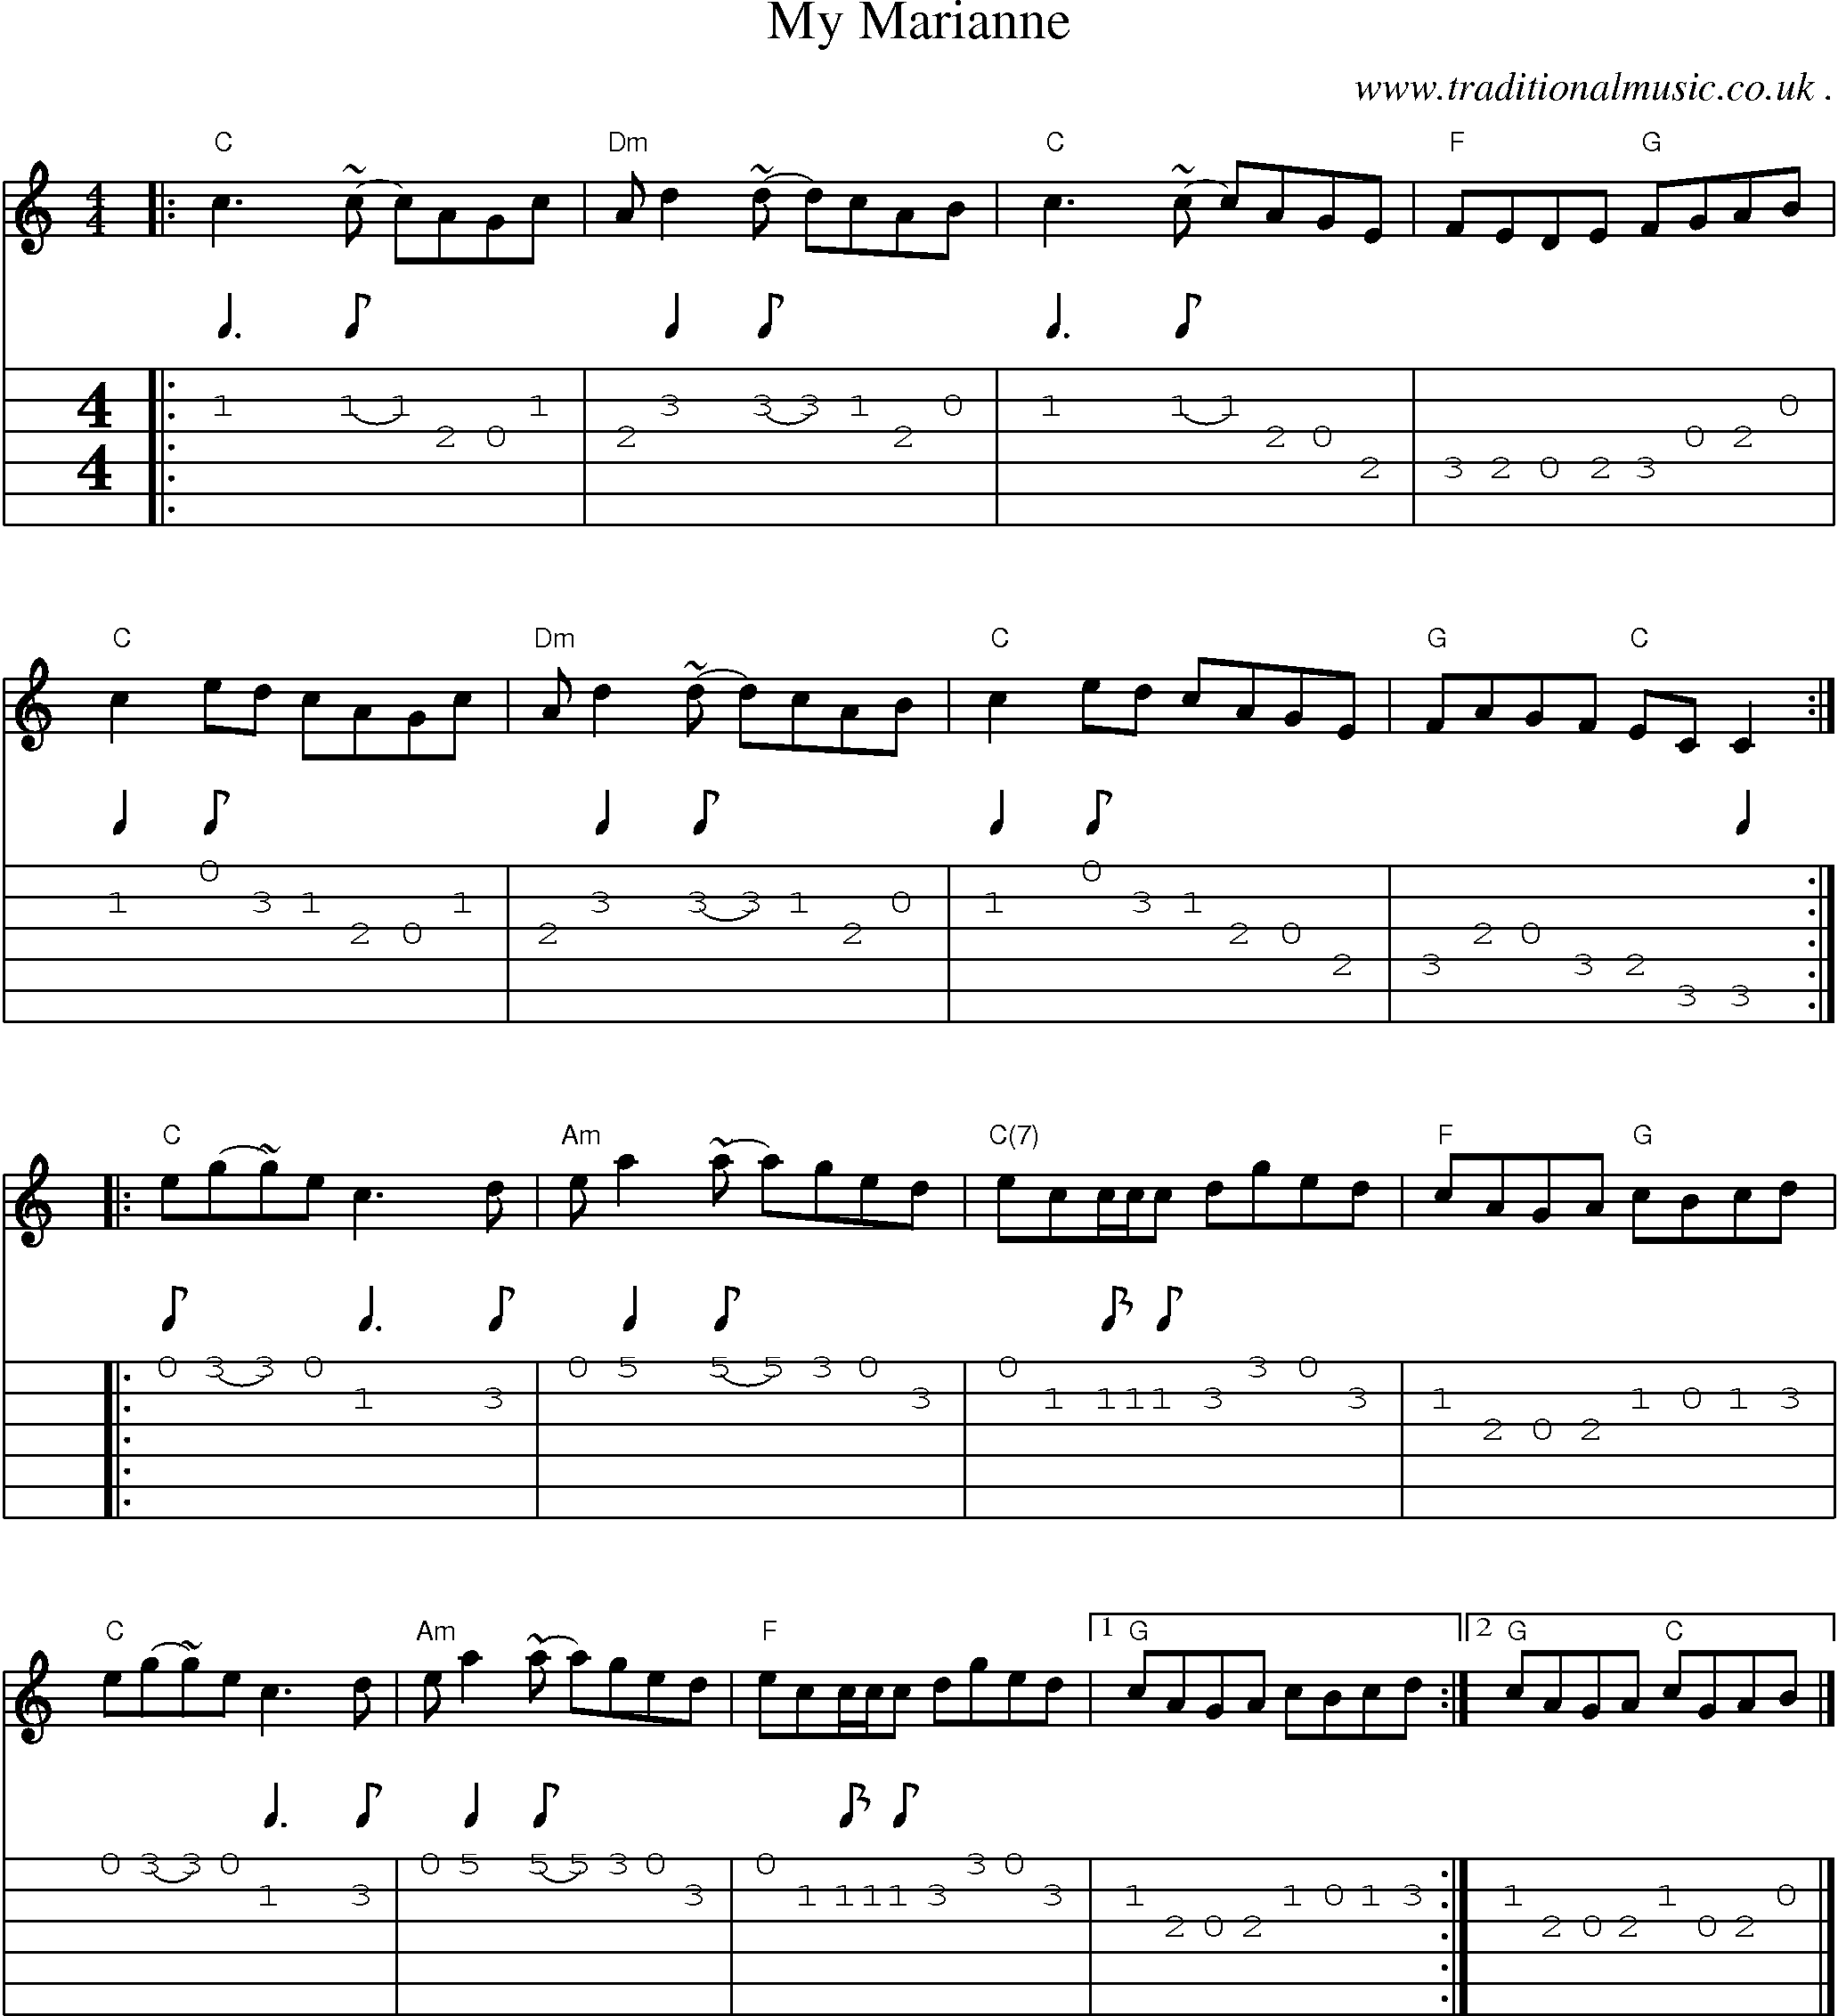 Music Score and Guitar Tabs for My Marianne